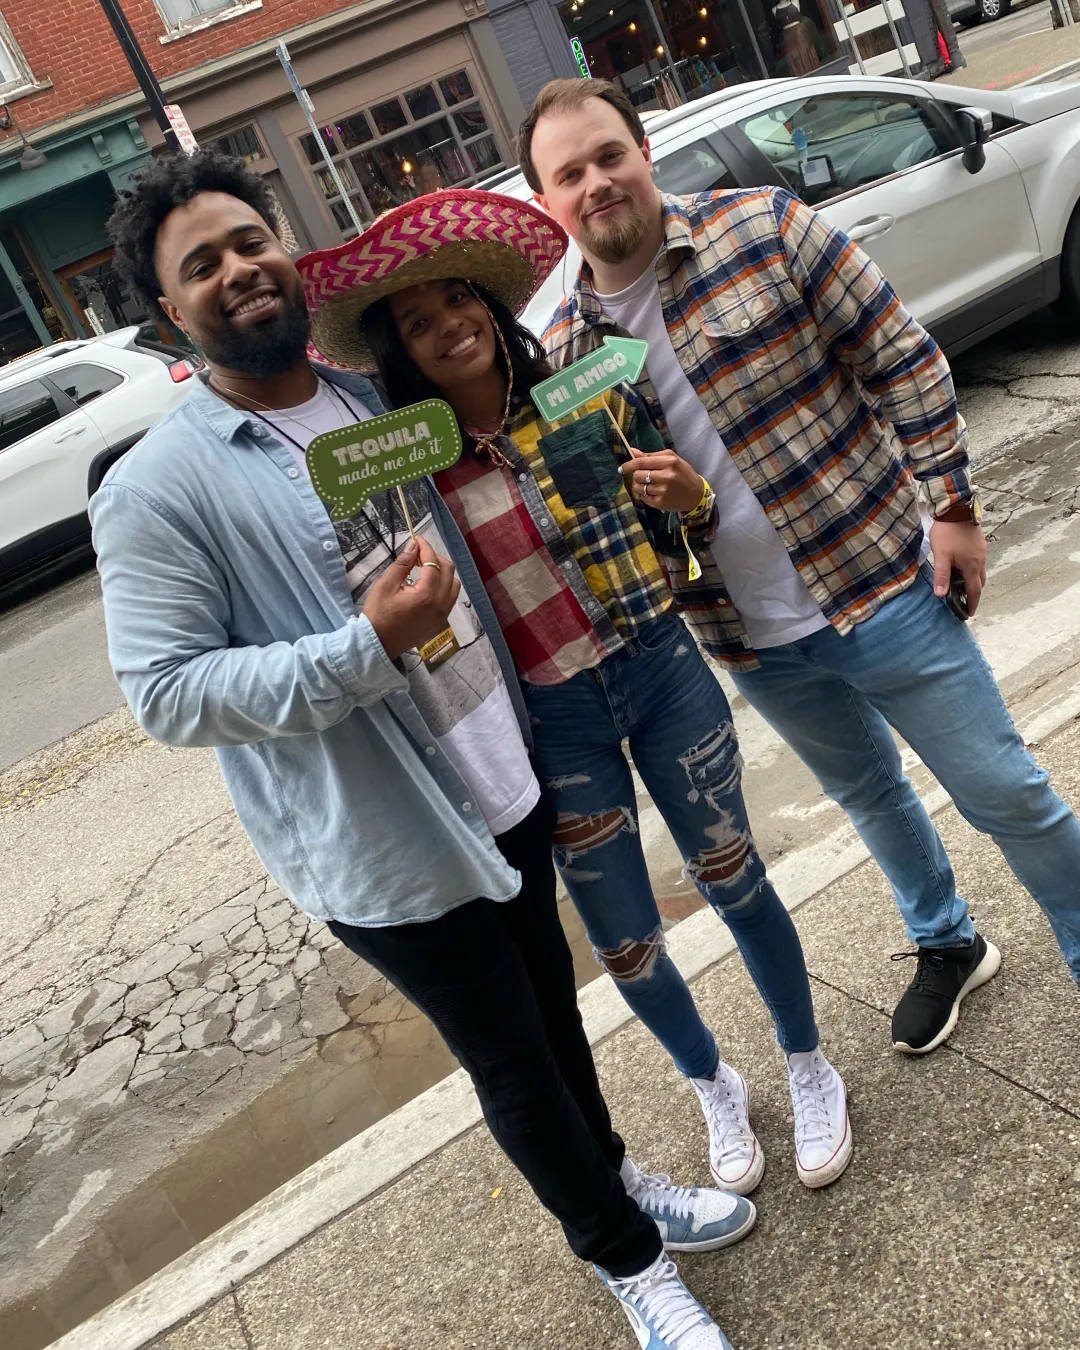 3 festive individuals gather outside one of the best bars in Pittsburgh checking in for the Tacos and Tequila Bar Crawl